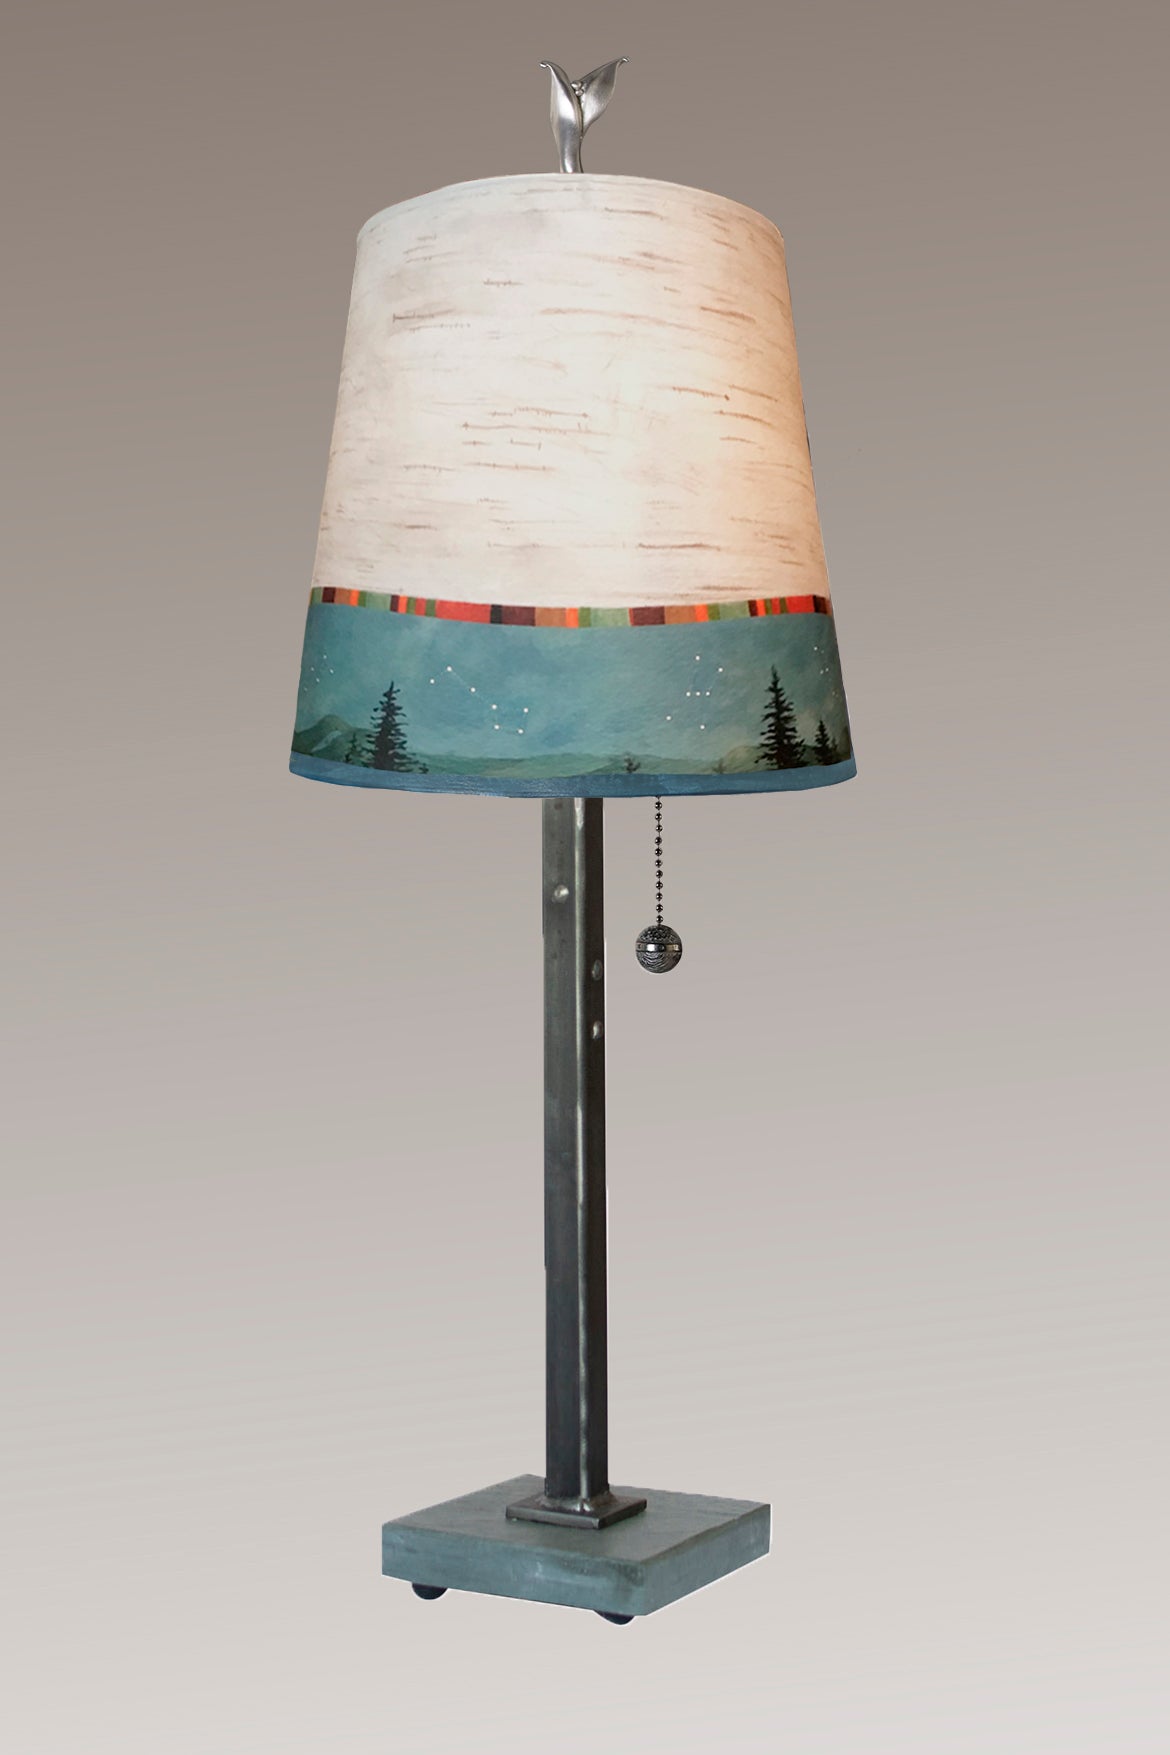 Janna Ugone &amp; Co Table Lamps Steel Table Lamp with Small Drum Shade in Birch Midnight